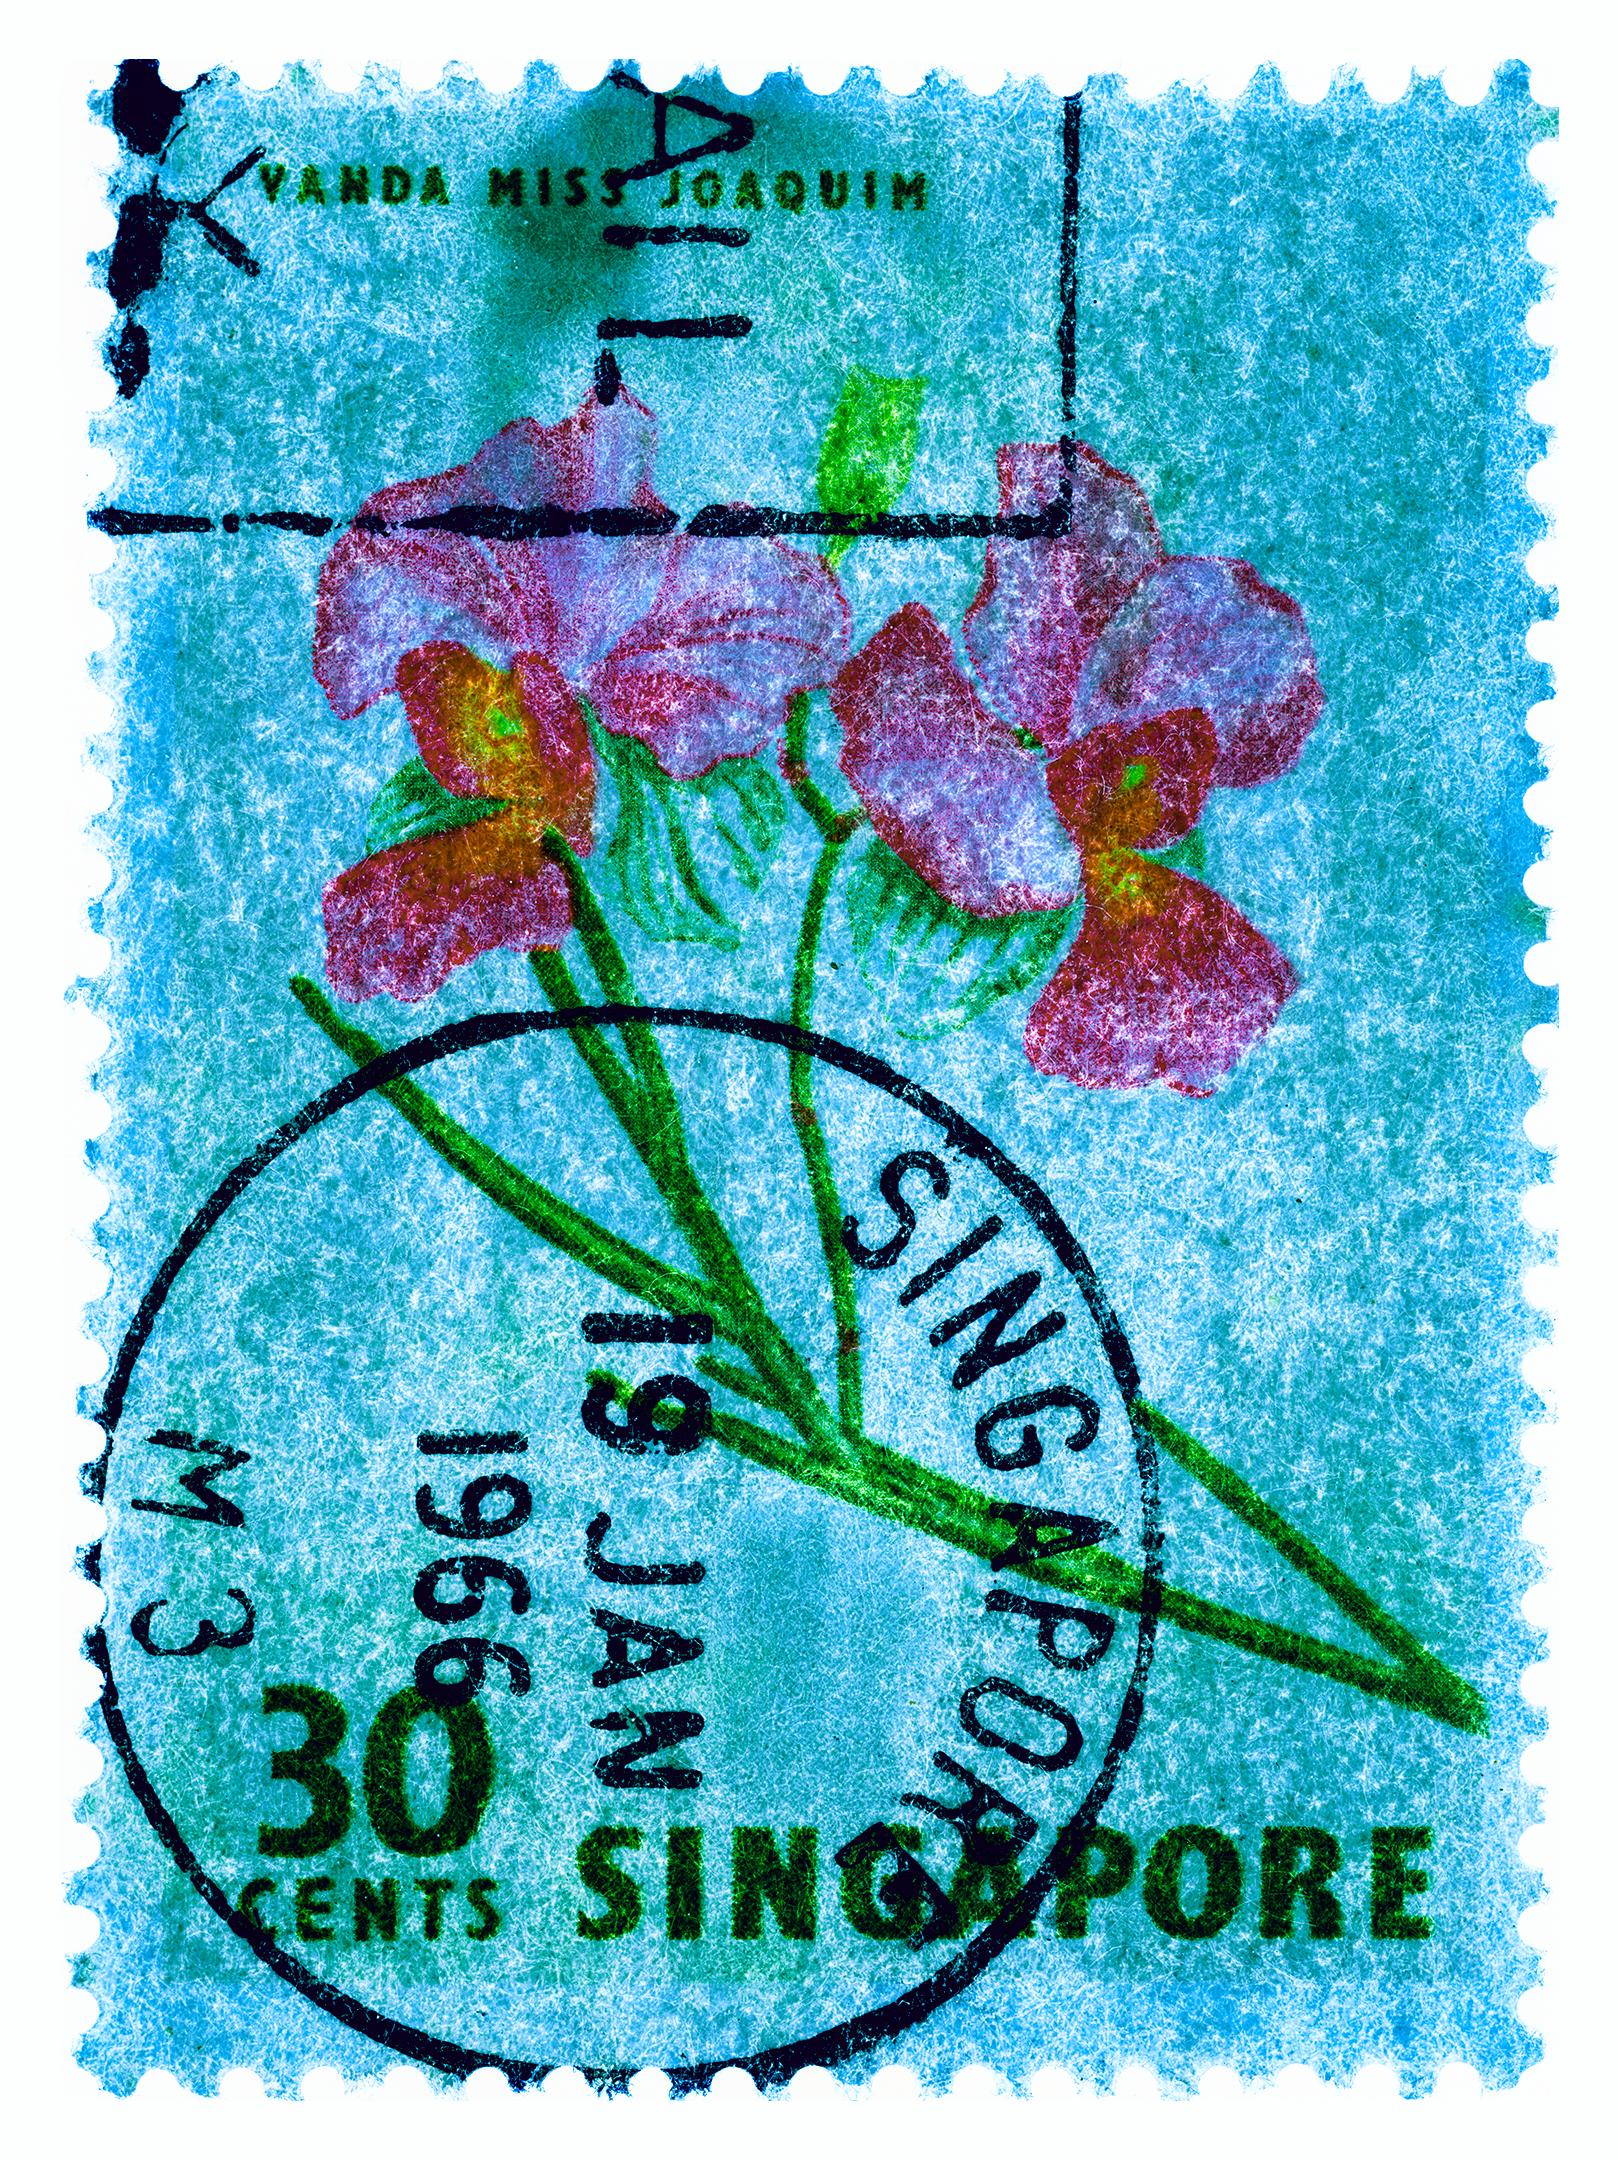 Singapore Stamp Collection, 30c Singapore Three - Floral color photo - Conceptual Photograph by Heidler & Heeps